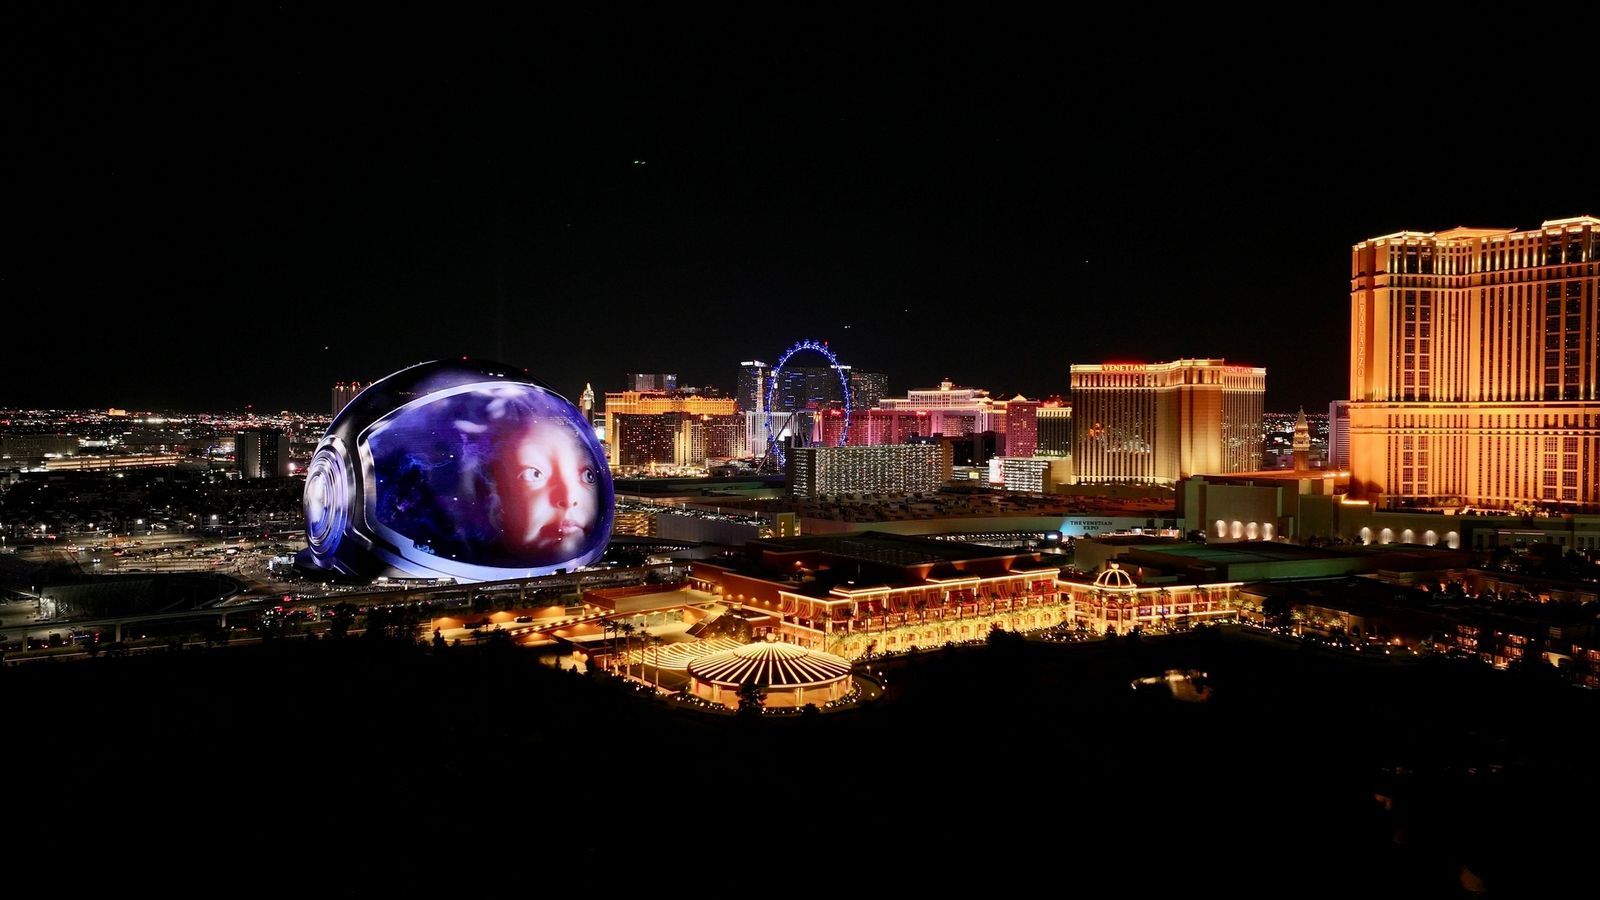 Las Vegas Sphere dazzles with Spaceship Earth-esque LED display